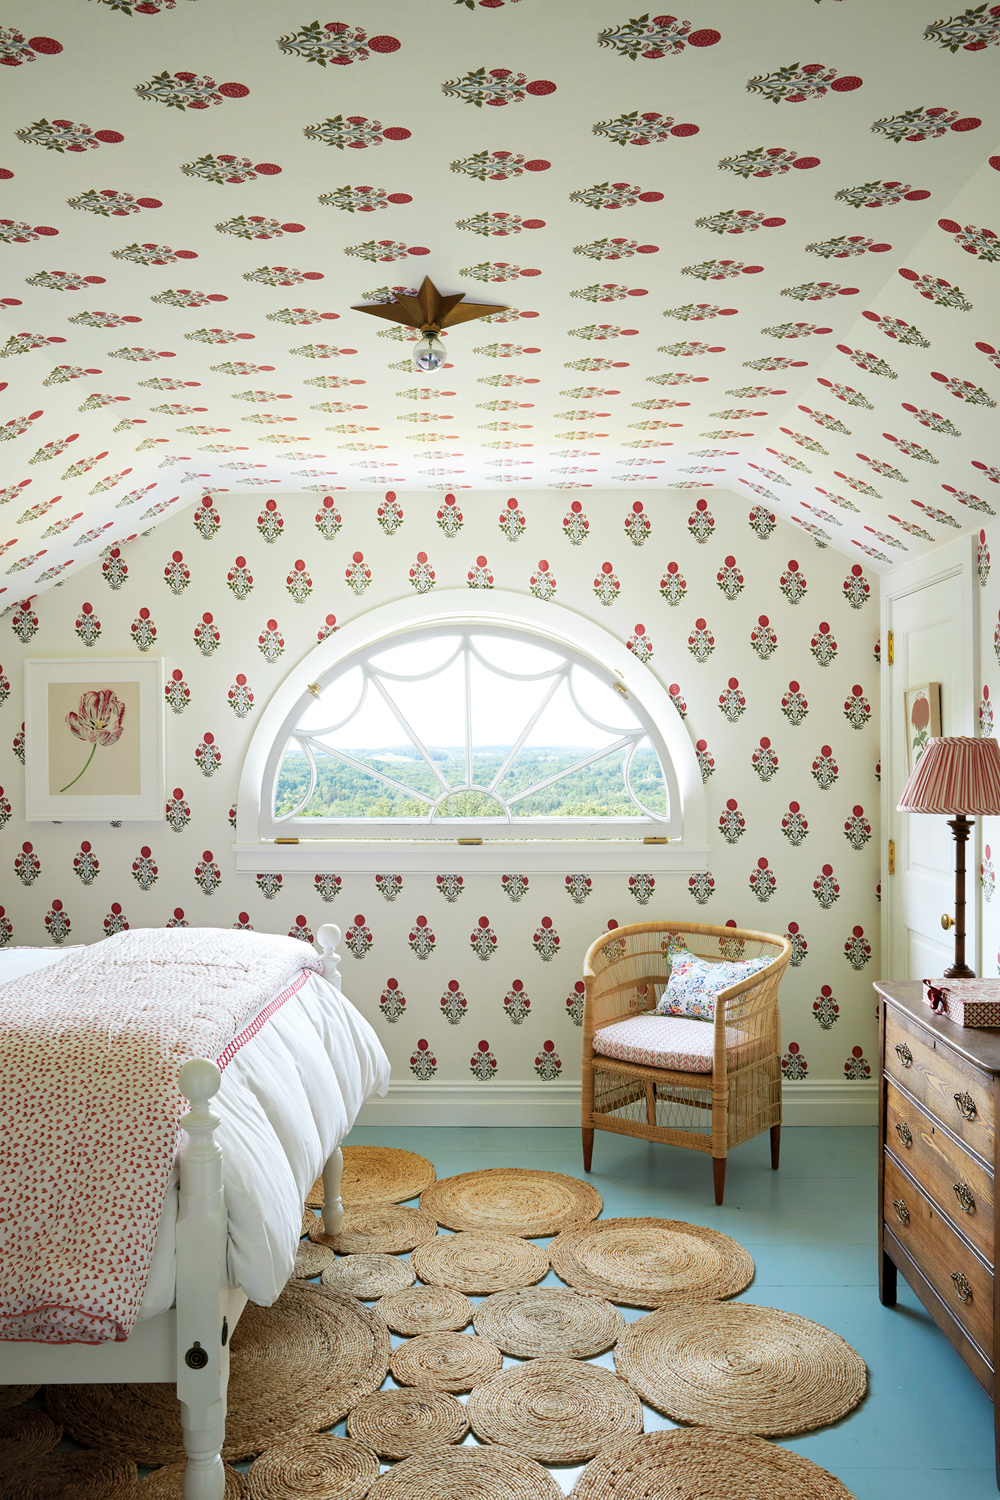 Bedroom with vaulted ceiling, patterned wallpaper and semi-circle-shaped window, with a bed and rattan chair